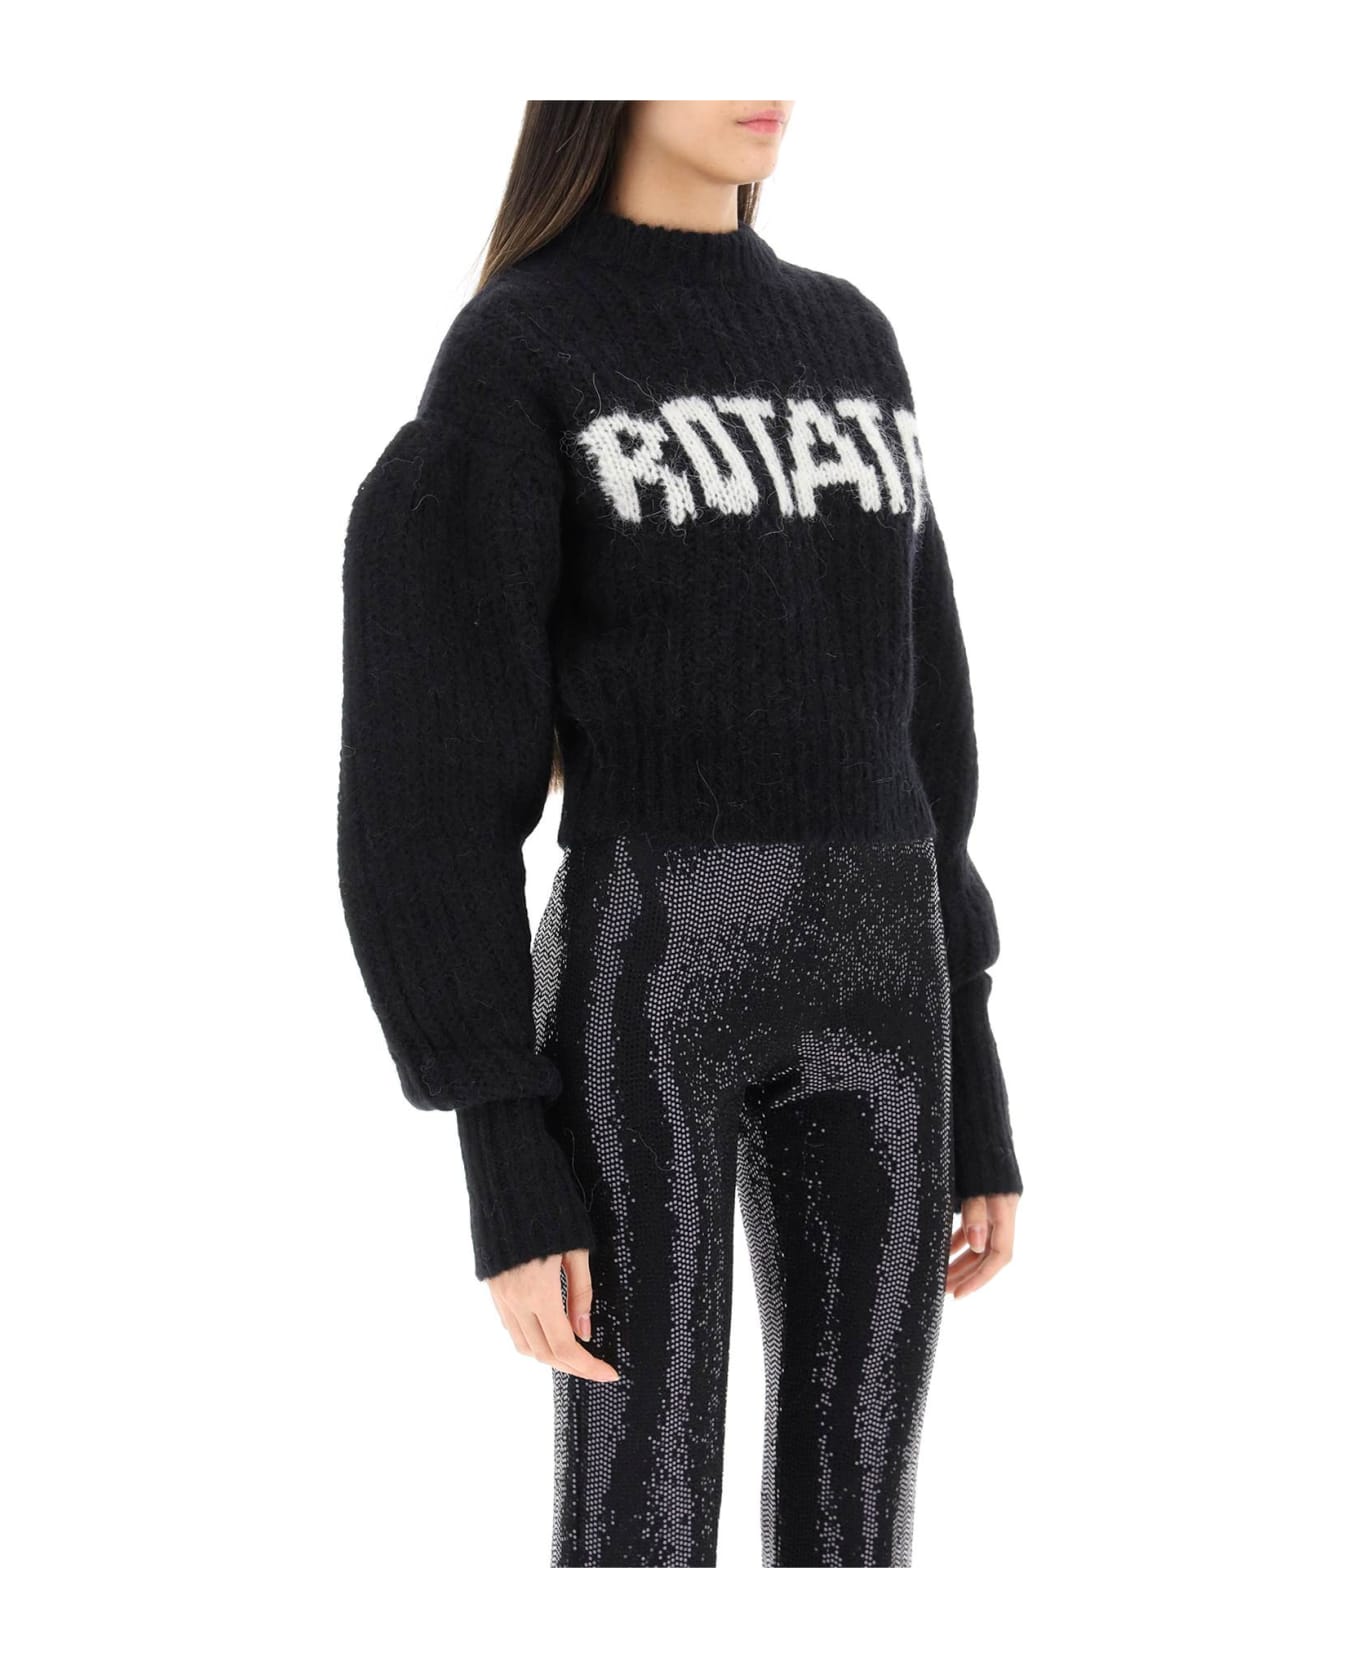 Rotate by Birger Christensen Wool And Alpaca Sweater With Logo - BLACK COMB (Black)